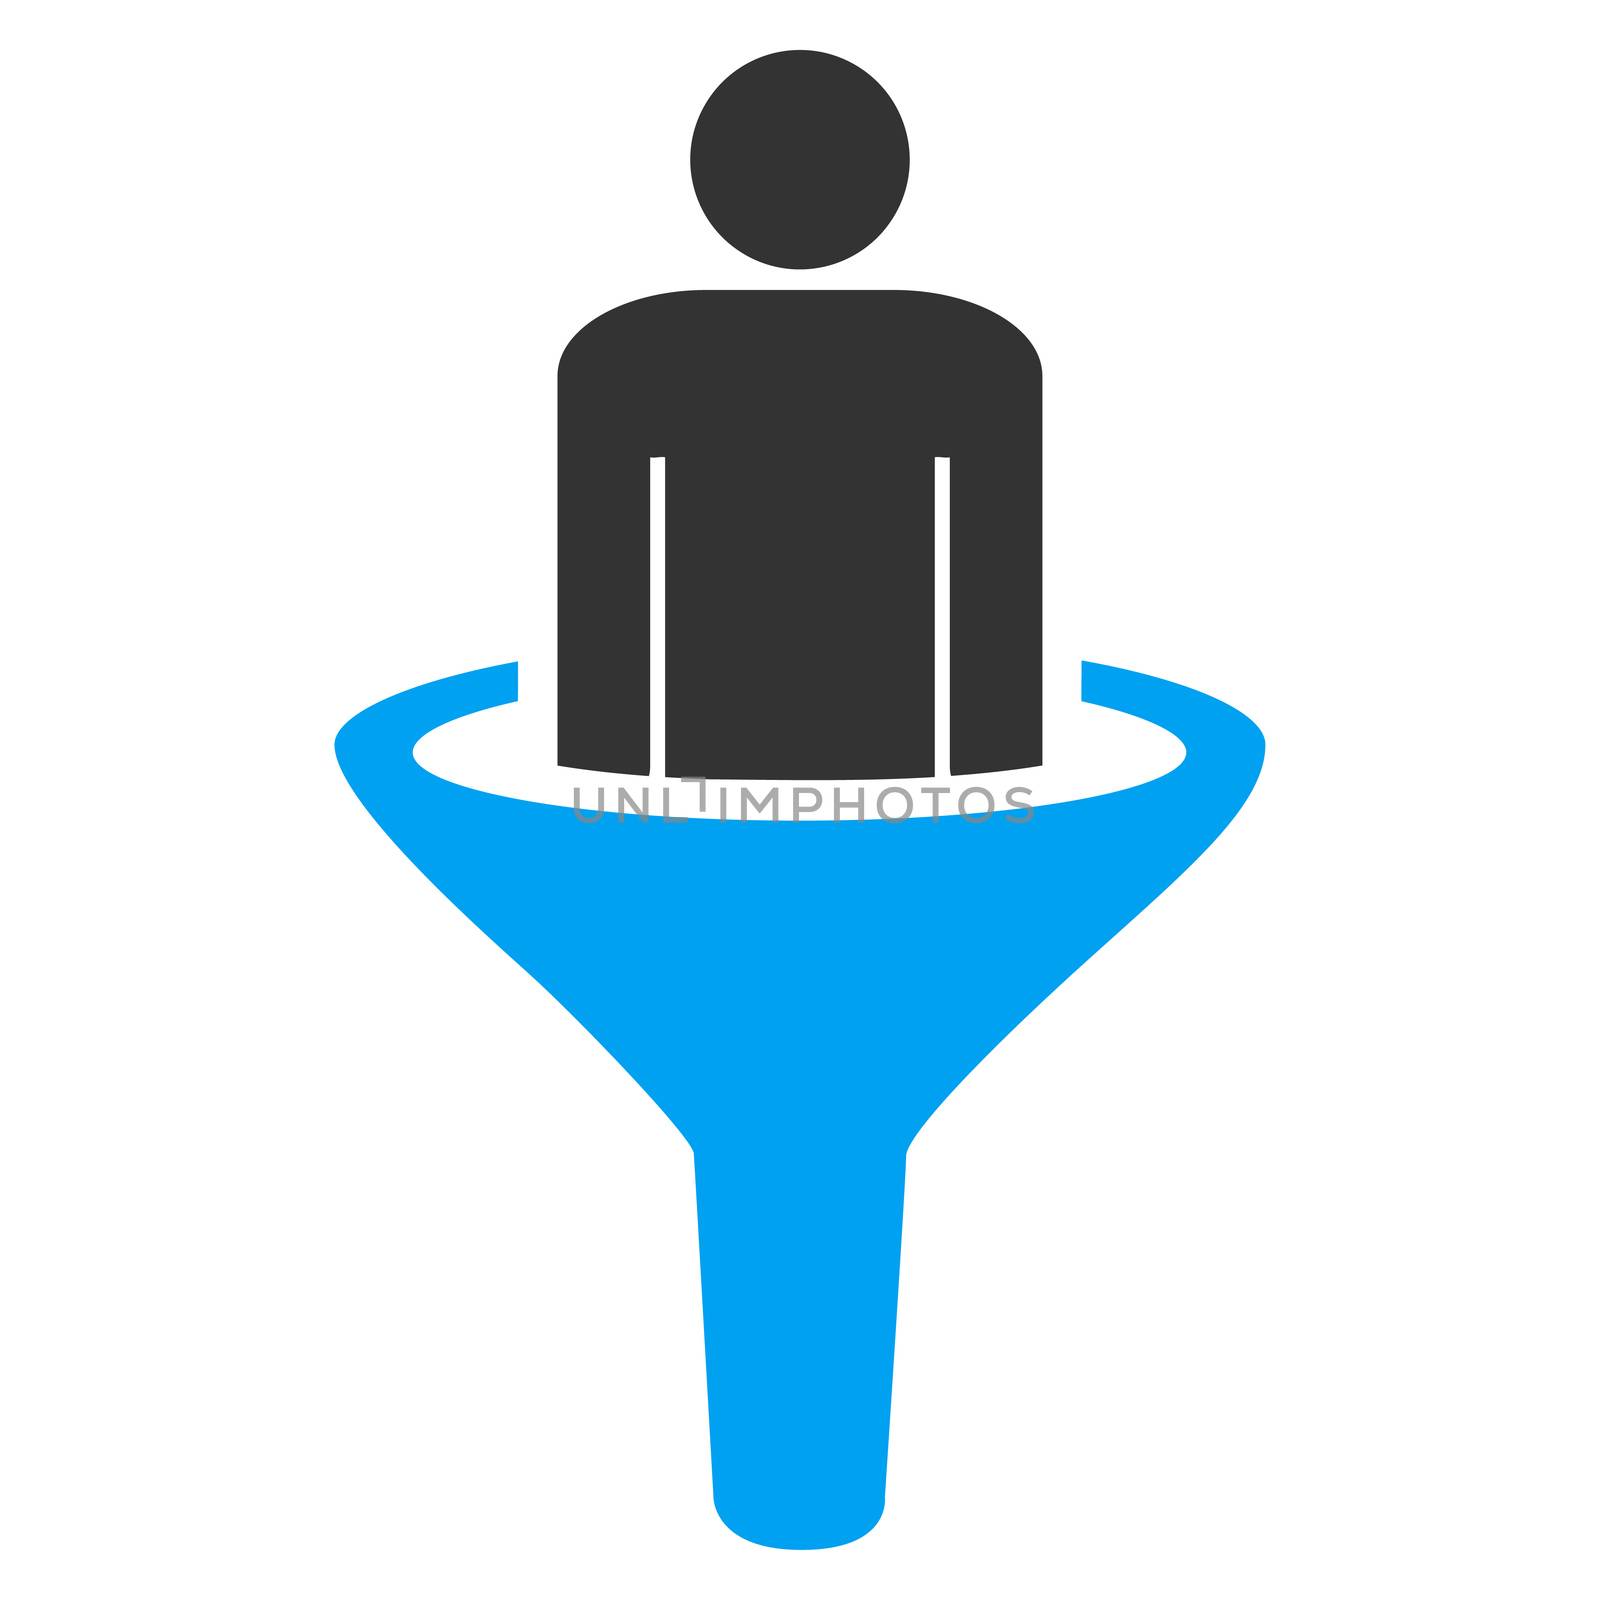 Sales funnel icon from Business Bicolor Set. Glyph style is bicolor flat symbol, blue and gray colors, rounded angles, white background.